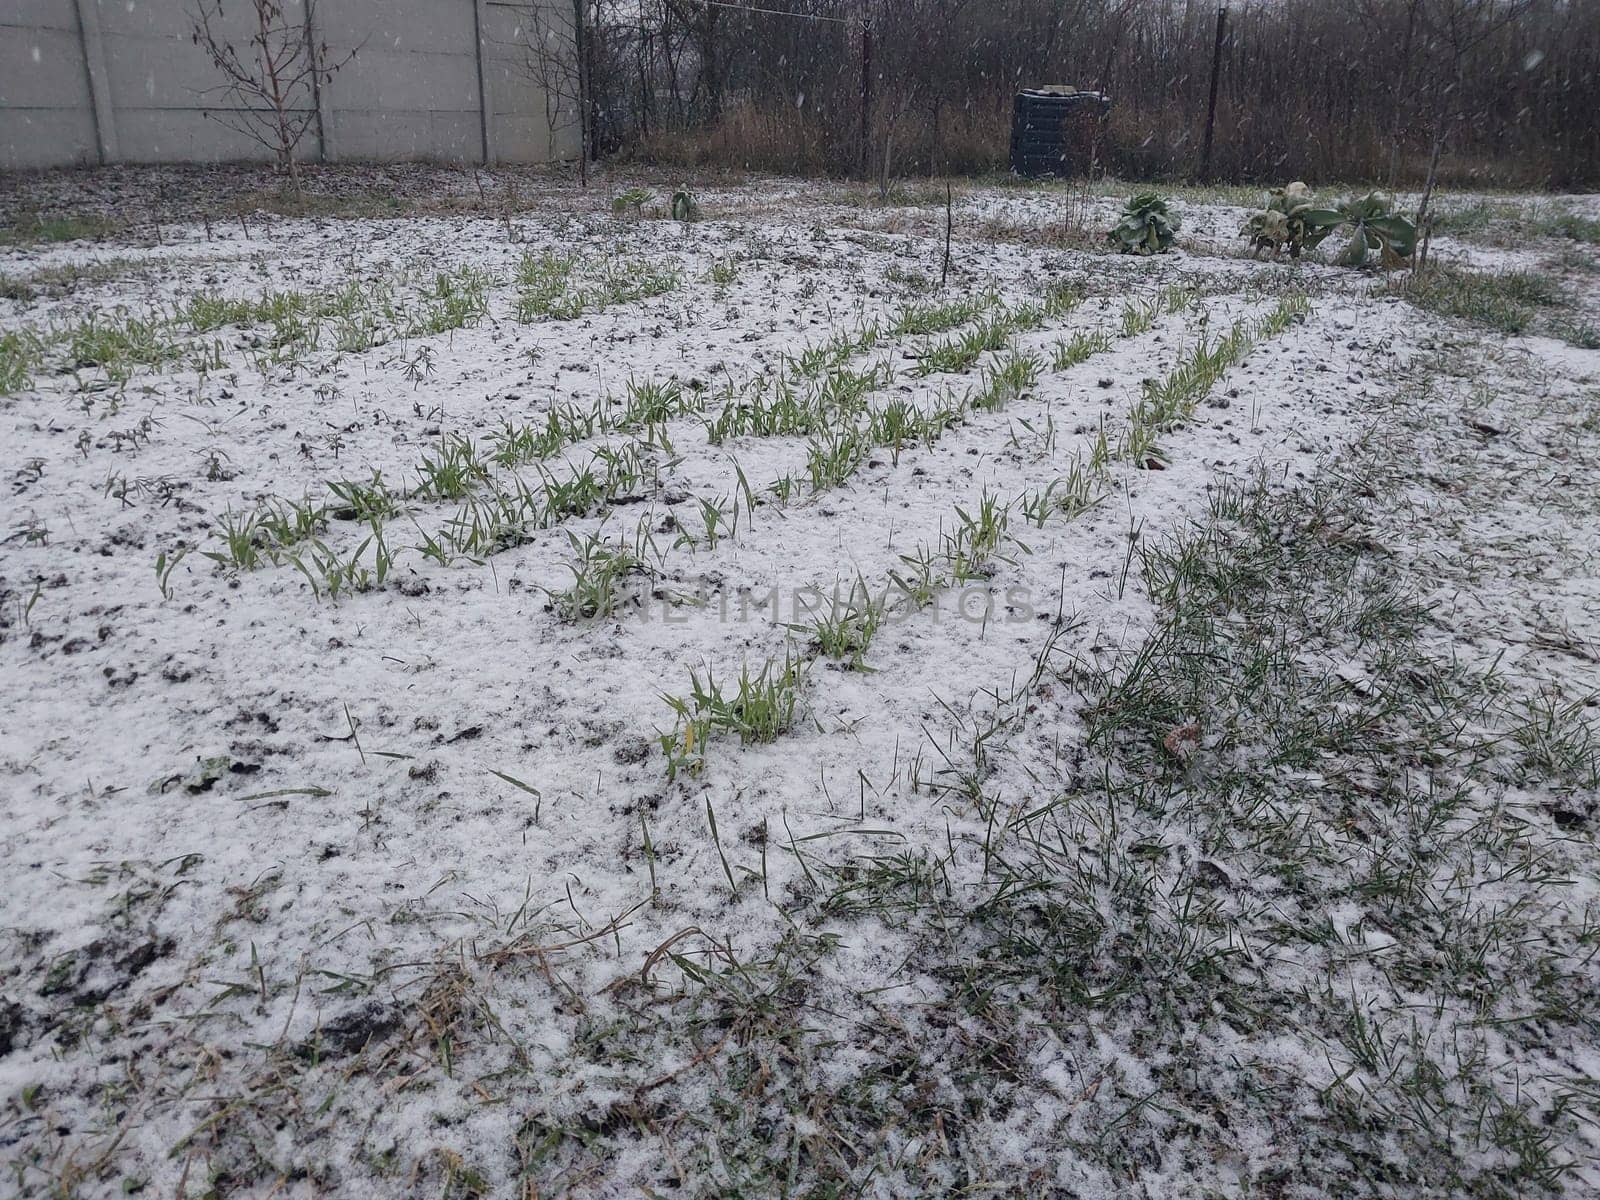 Snow fell on the garden where vegetables grow in the village by architectphd